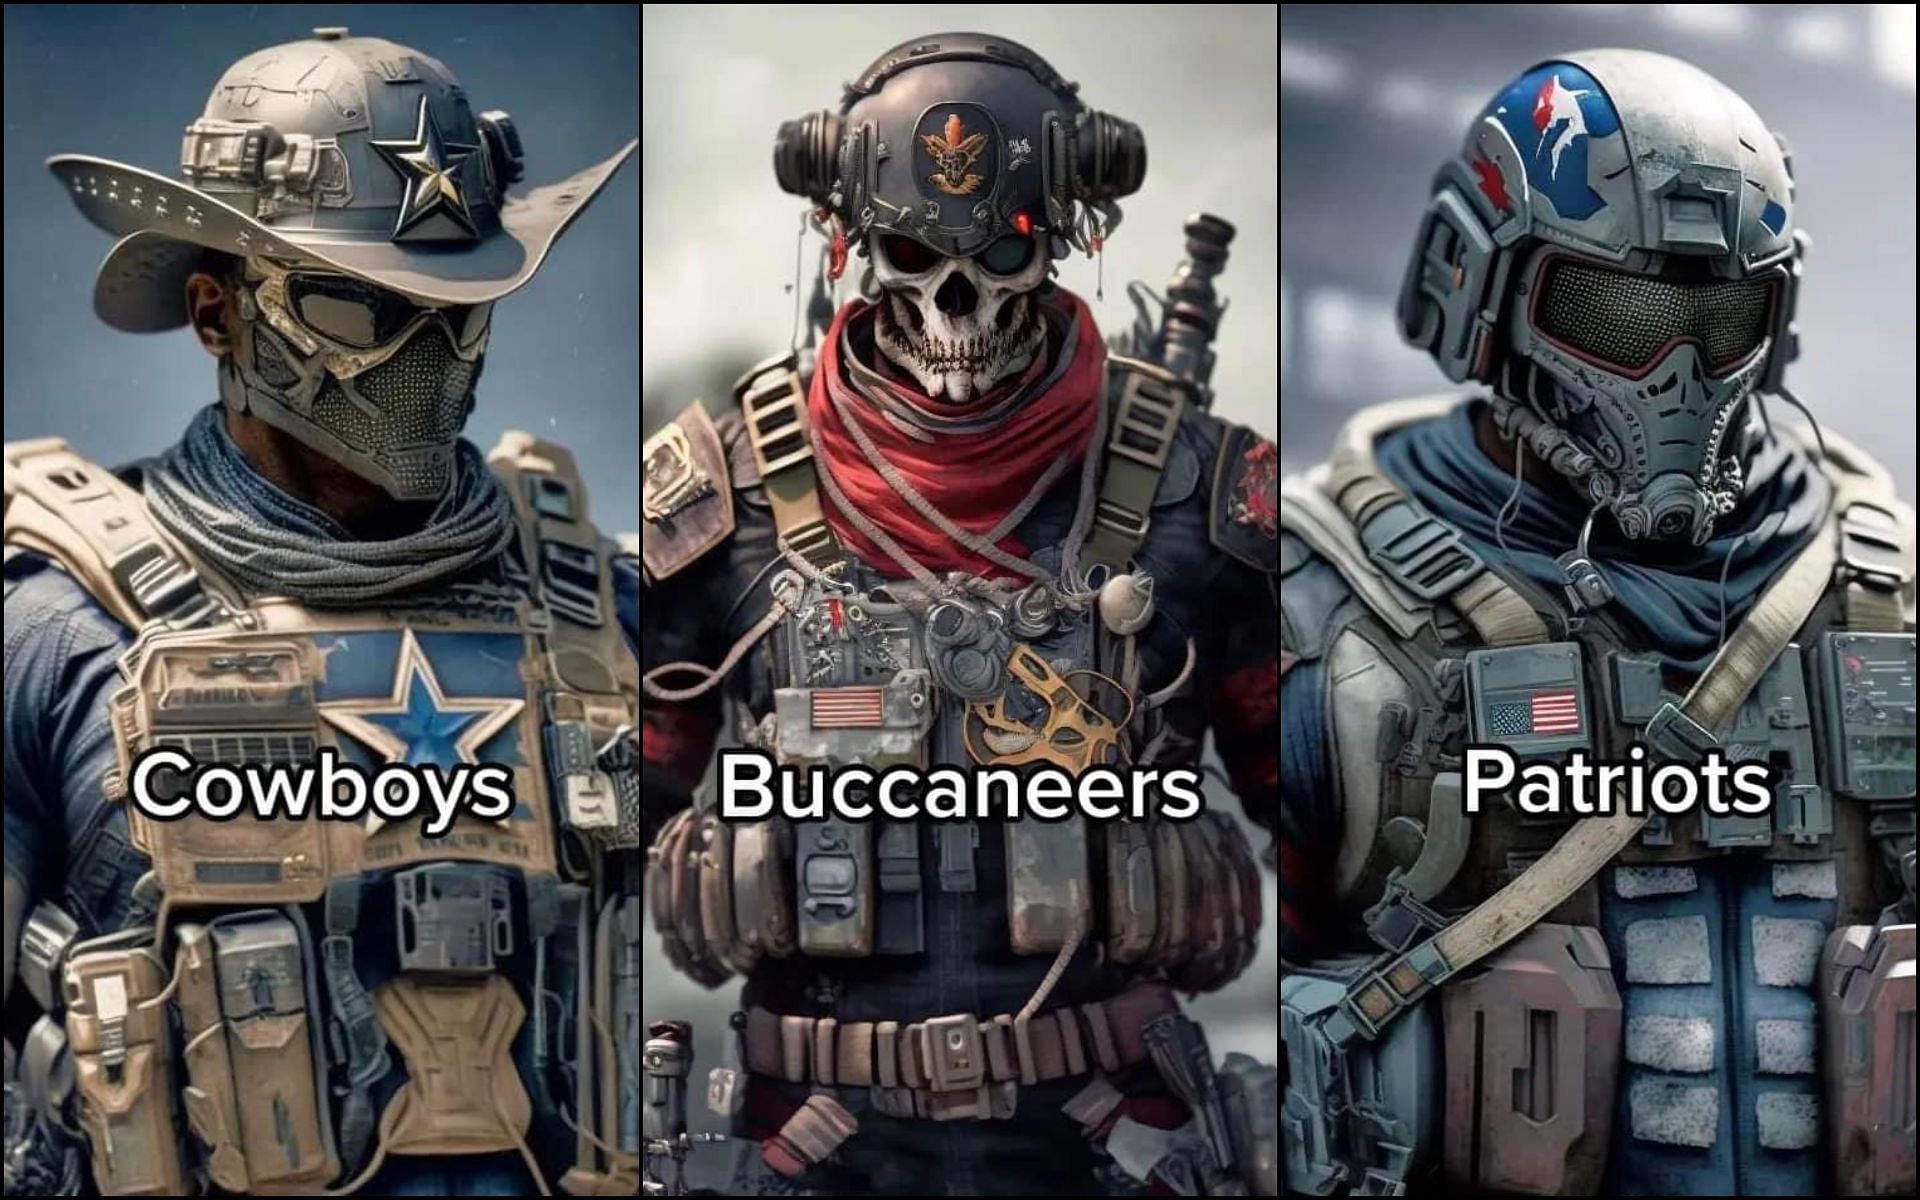 Call of Duty NFL operator skins from an unknown source (Image via Sportskeeda)